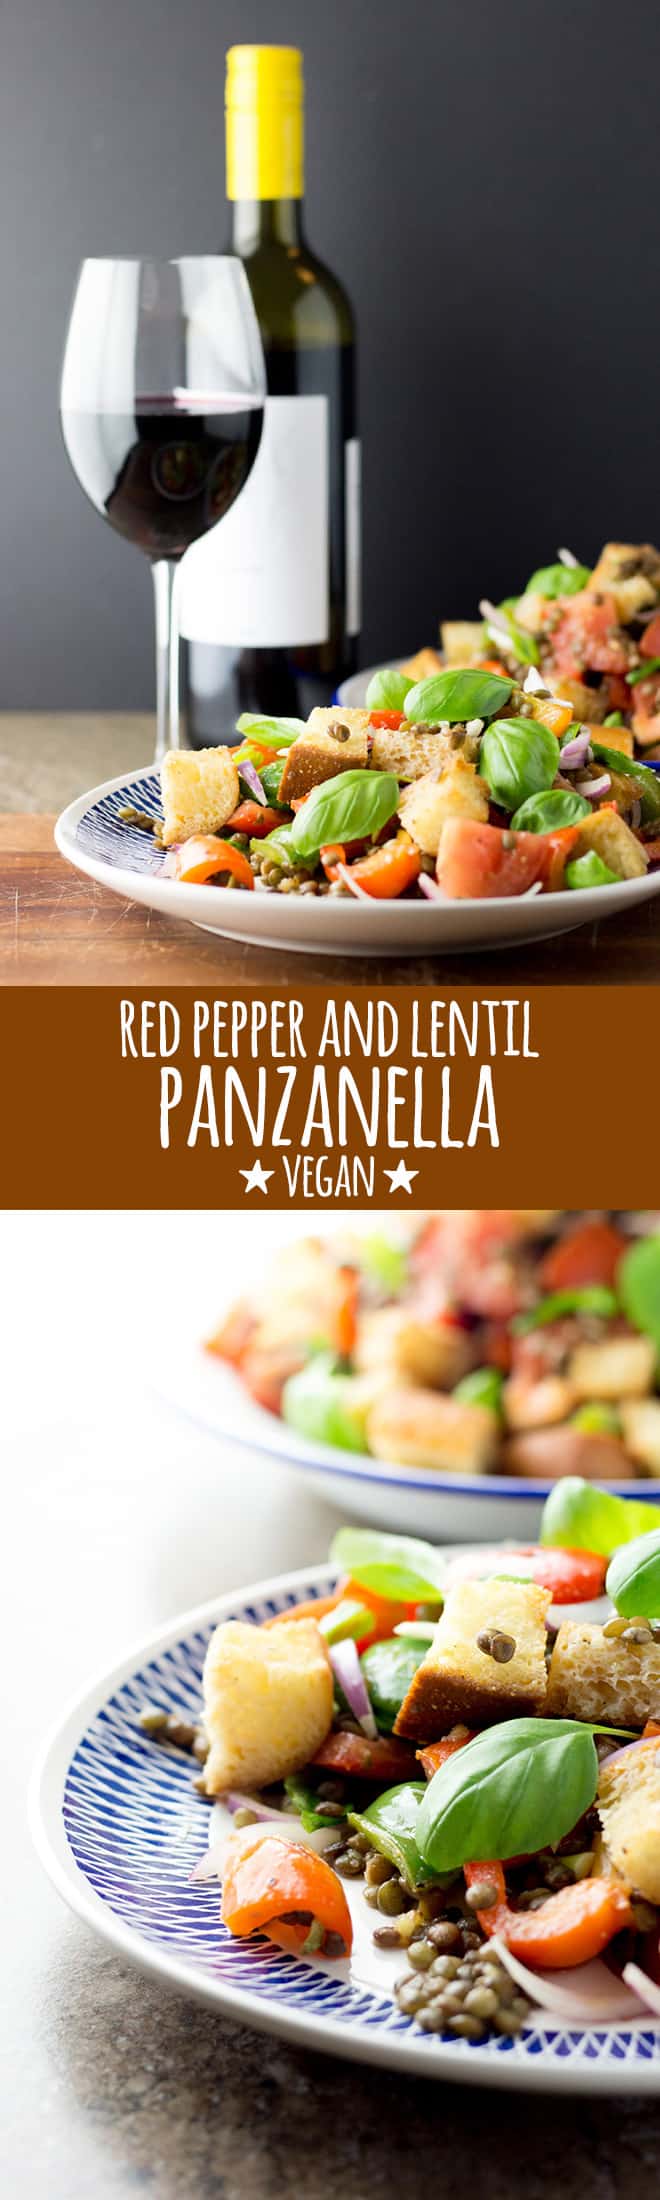 A simple and delicious panzanella salad with green lentils, mixed peppers and tomatoes dressed with a light and bright red wine vinaigrette.